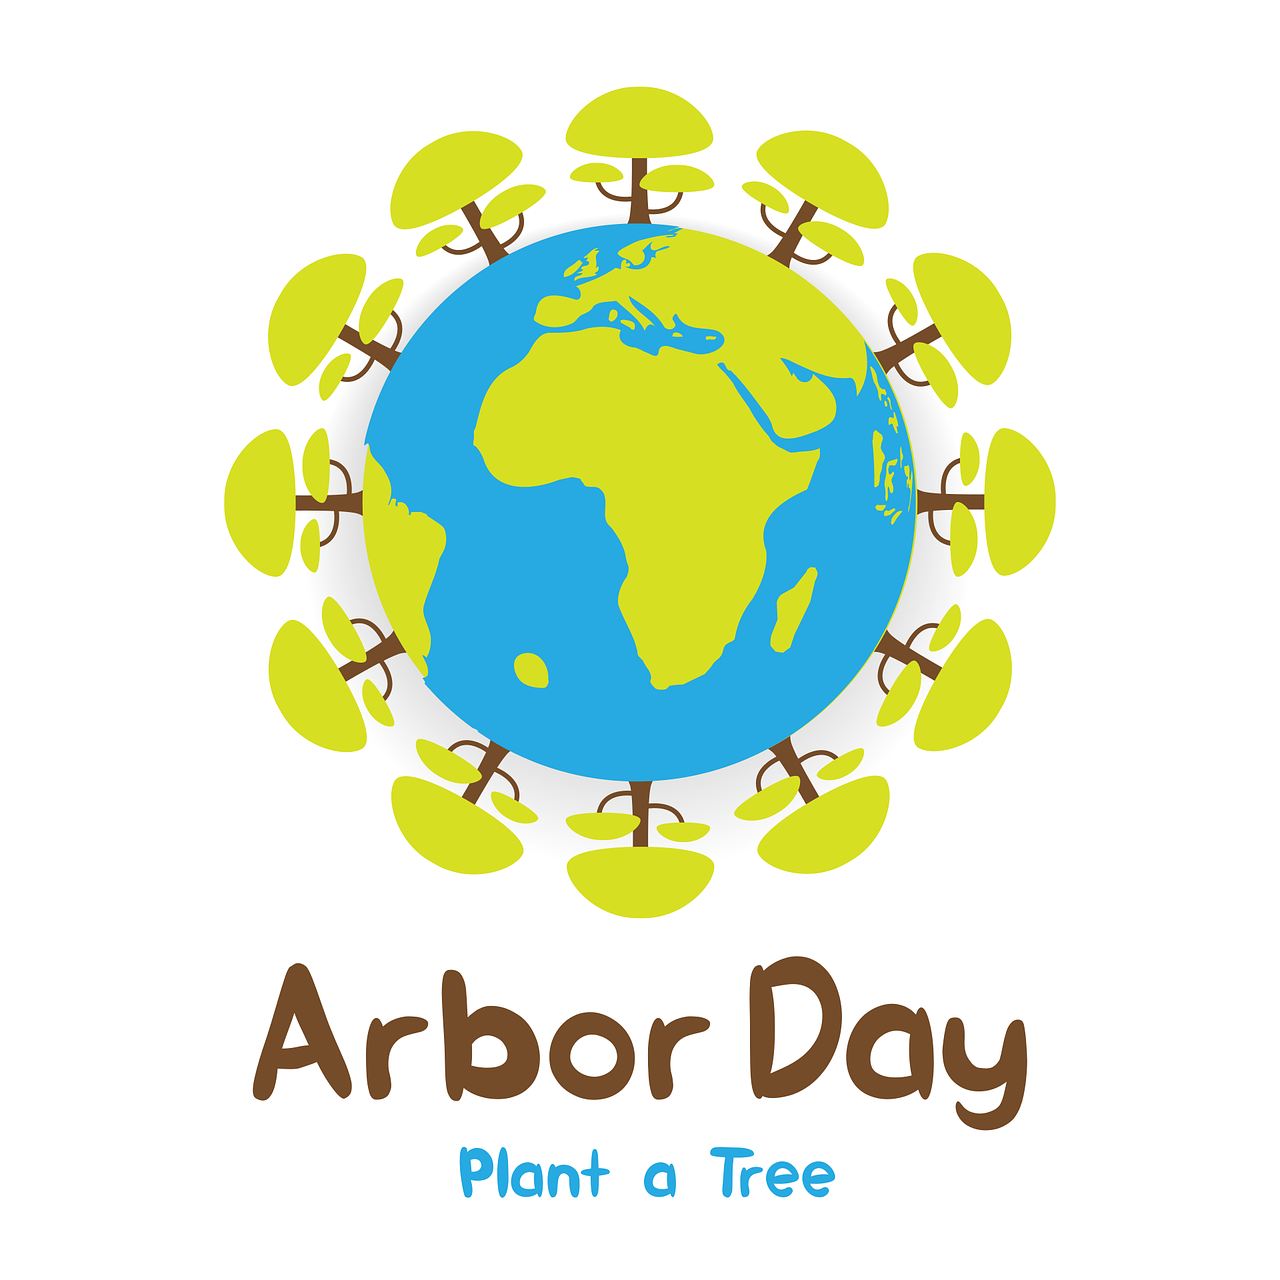 10 Fascinating Historical Facts About Arbor Day